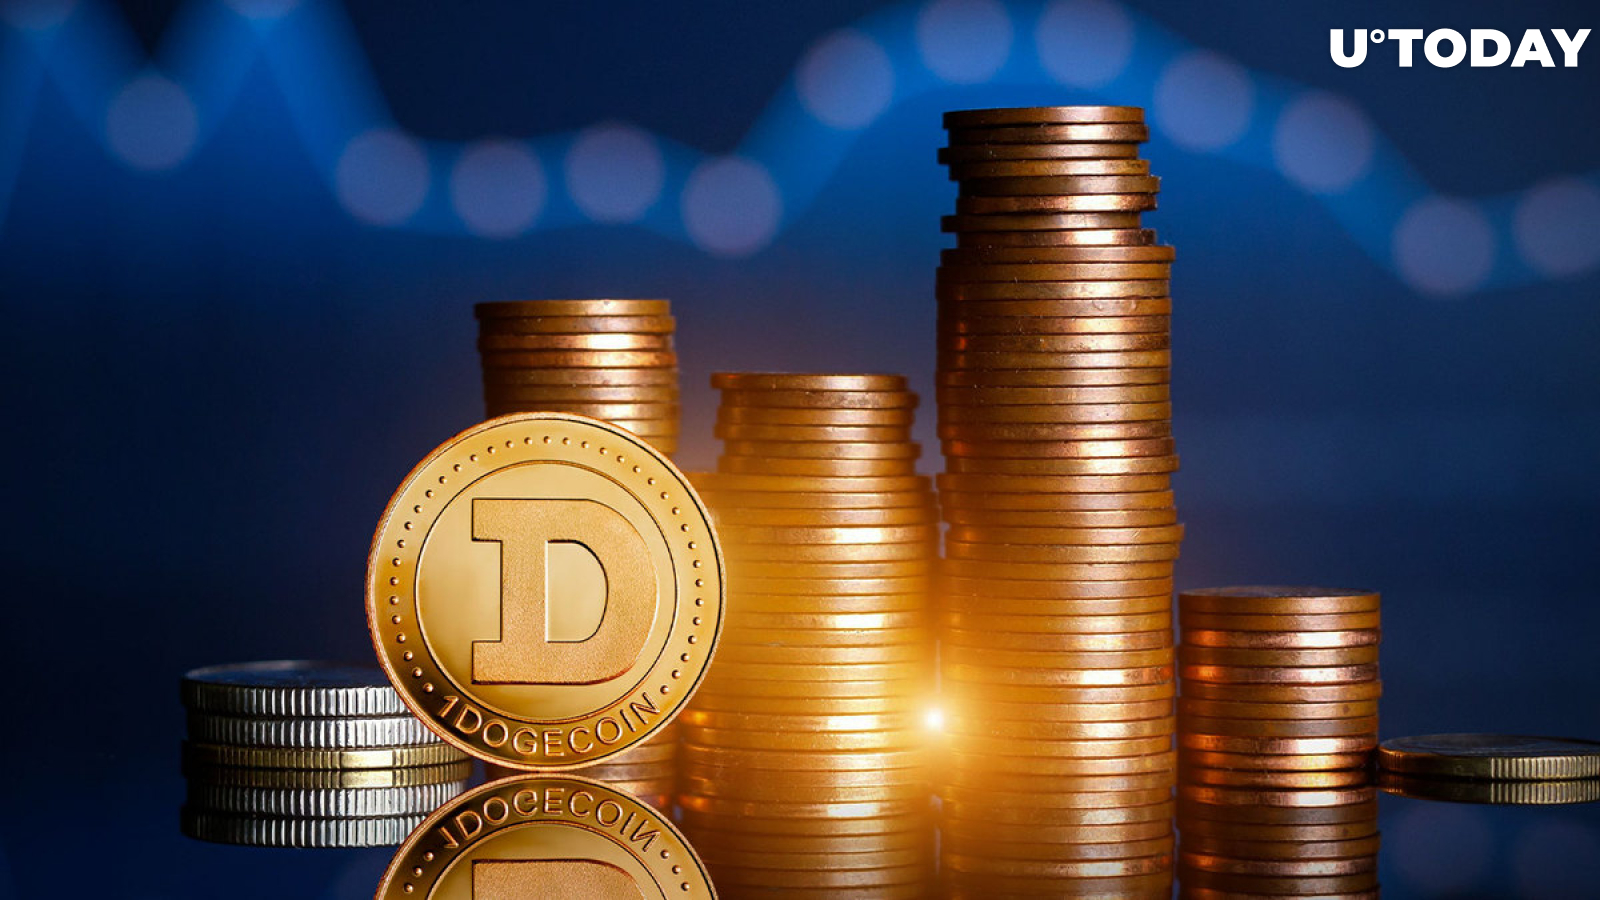 Dogecoin (DOGE) Hits Truce as Recovery Signals Surface